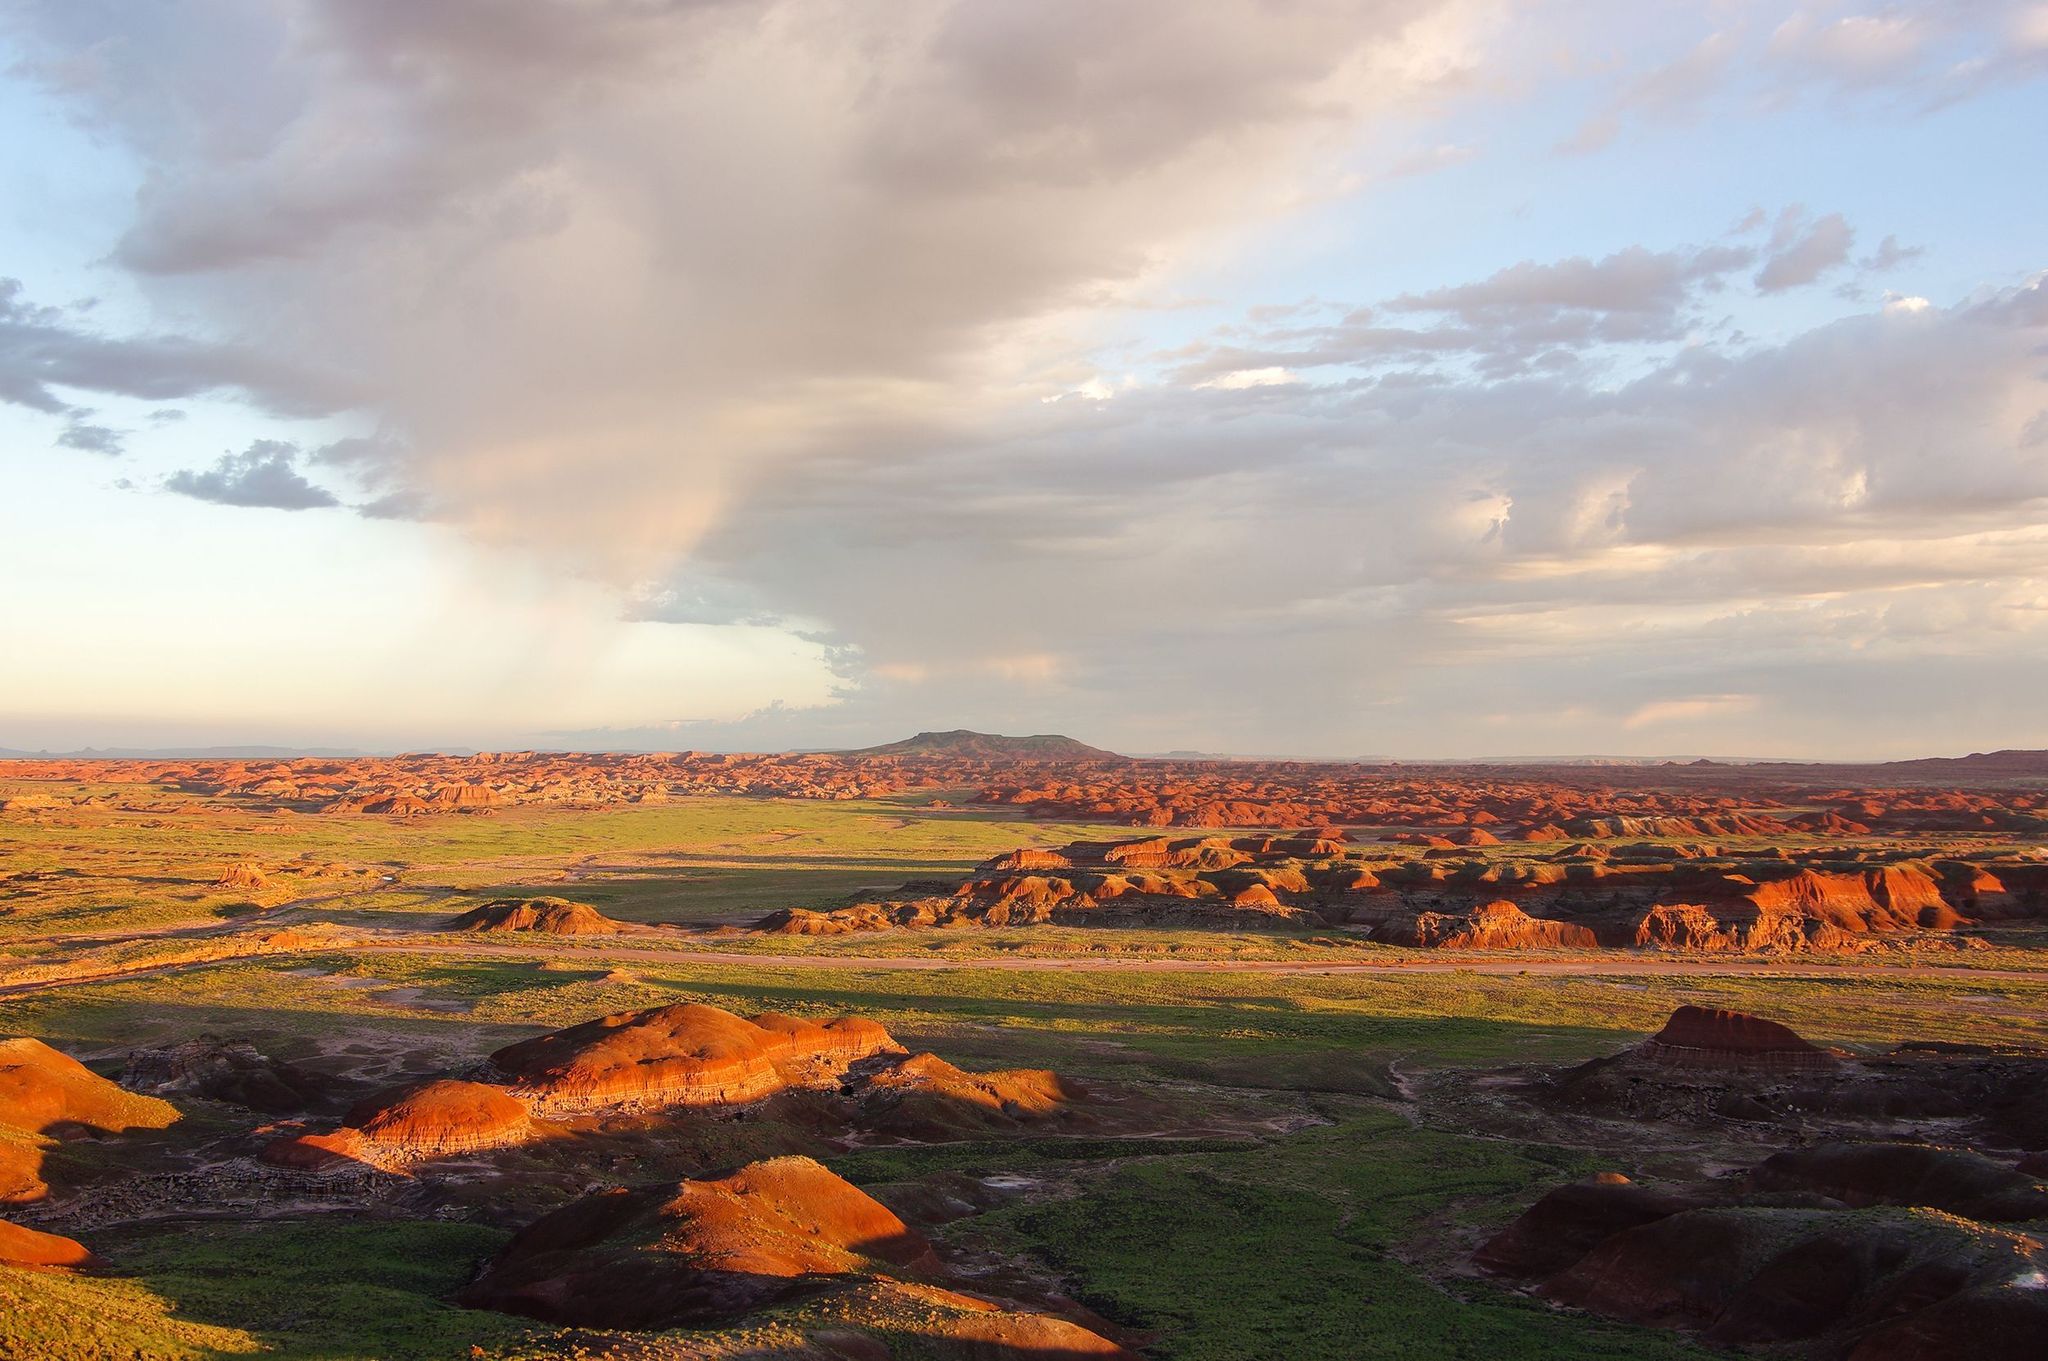 Sunrise and sunset are favorite times to view the colorful Painted Desert of the Petrified Forest National Wilderness Area